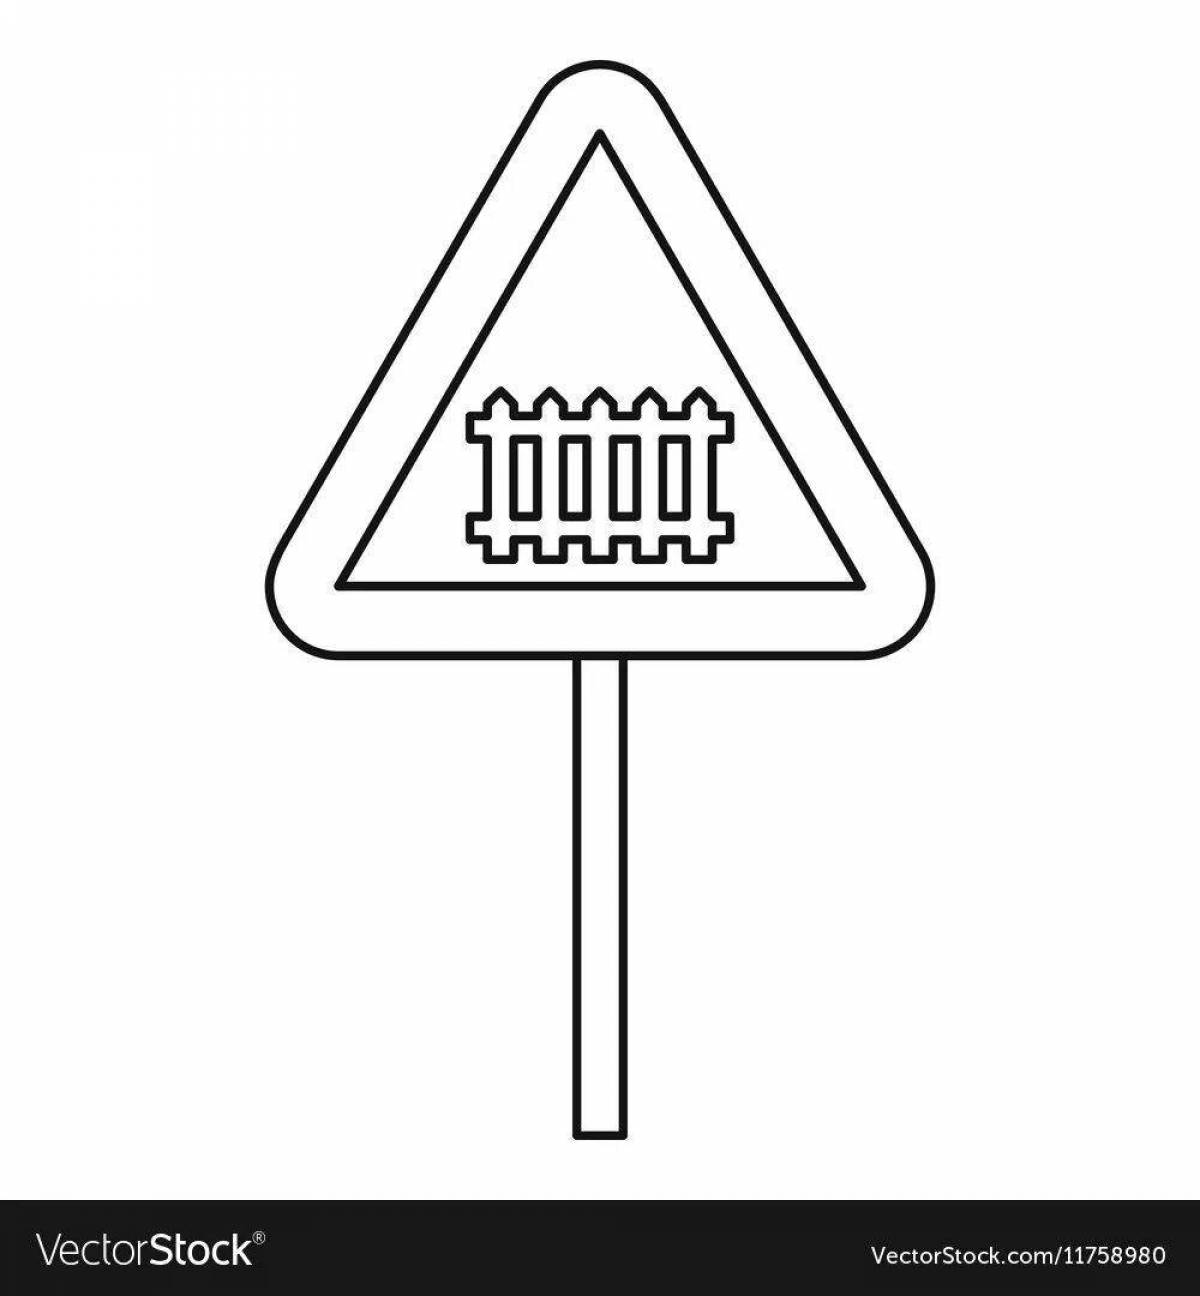 Coloring book mystical beaded sign of caution